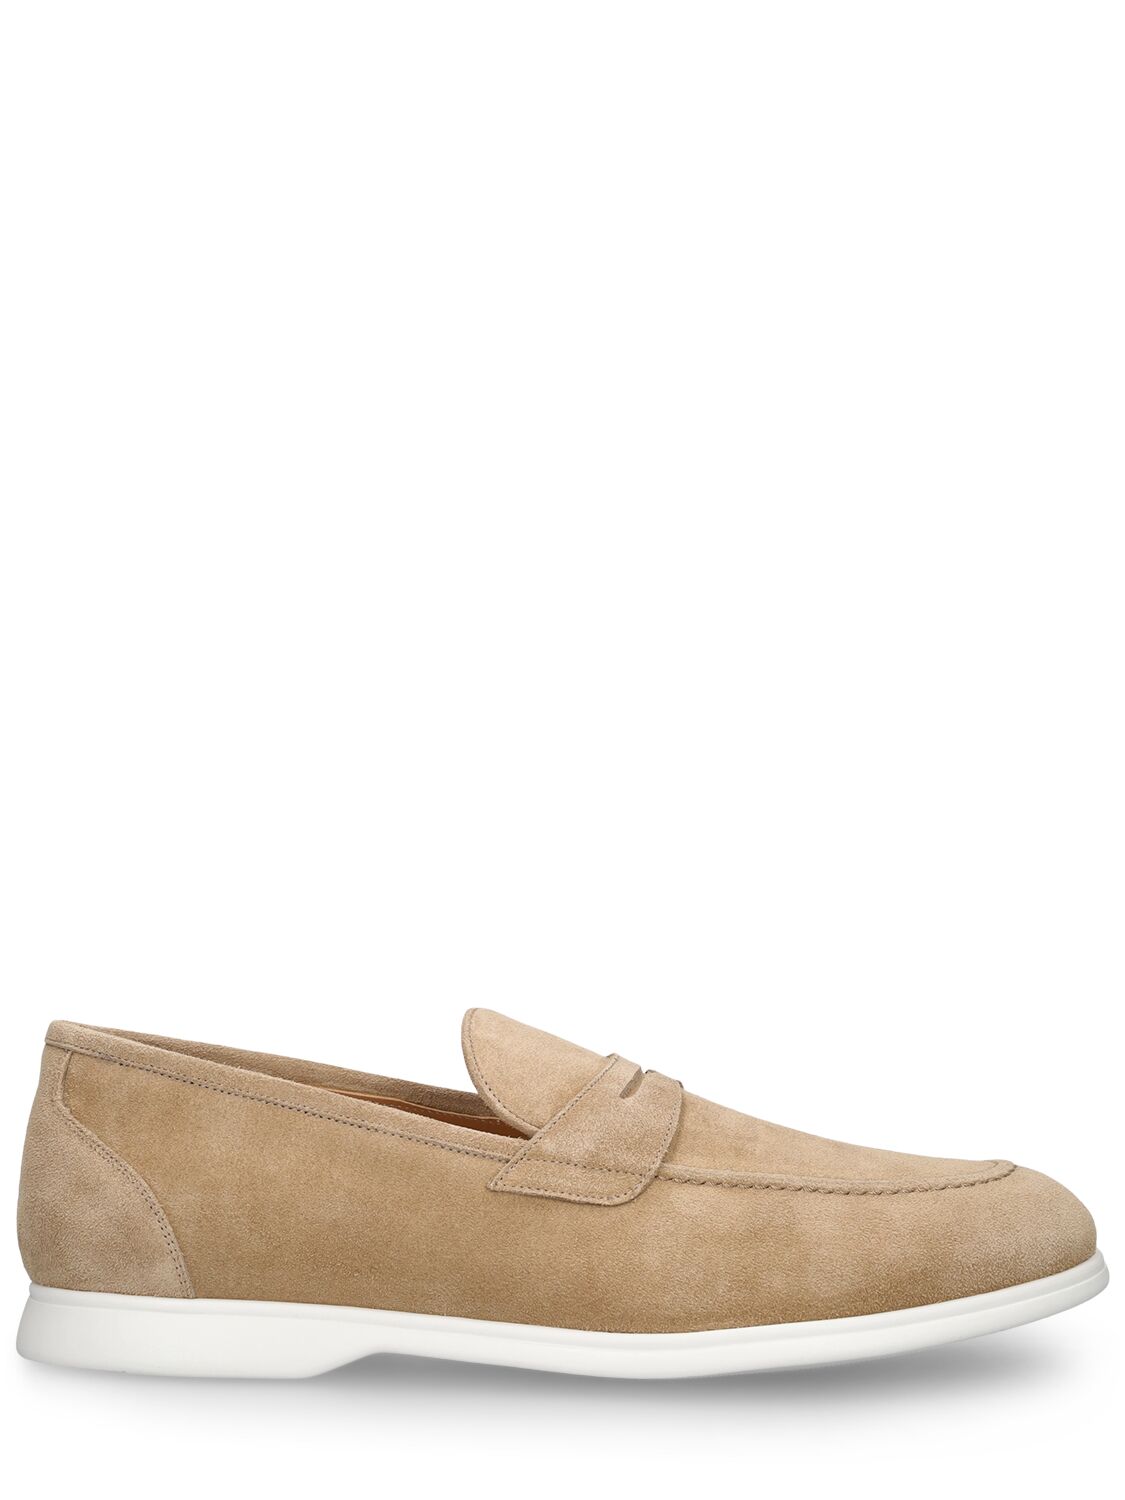 Image of Suede White Sole Loafers